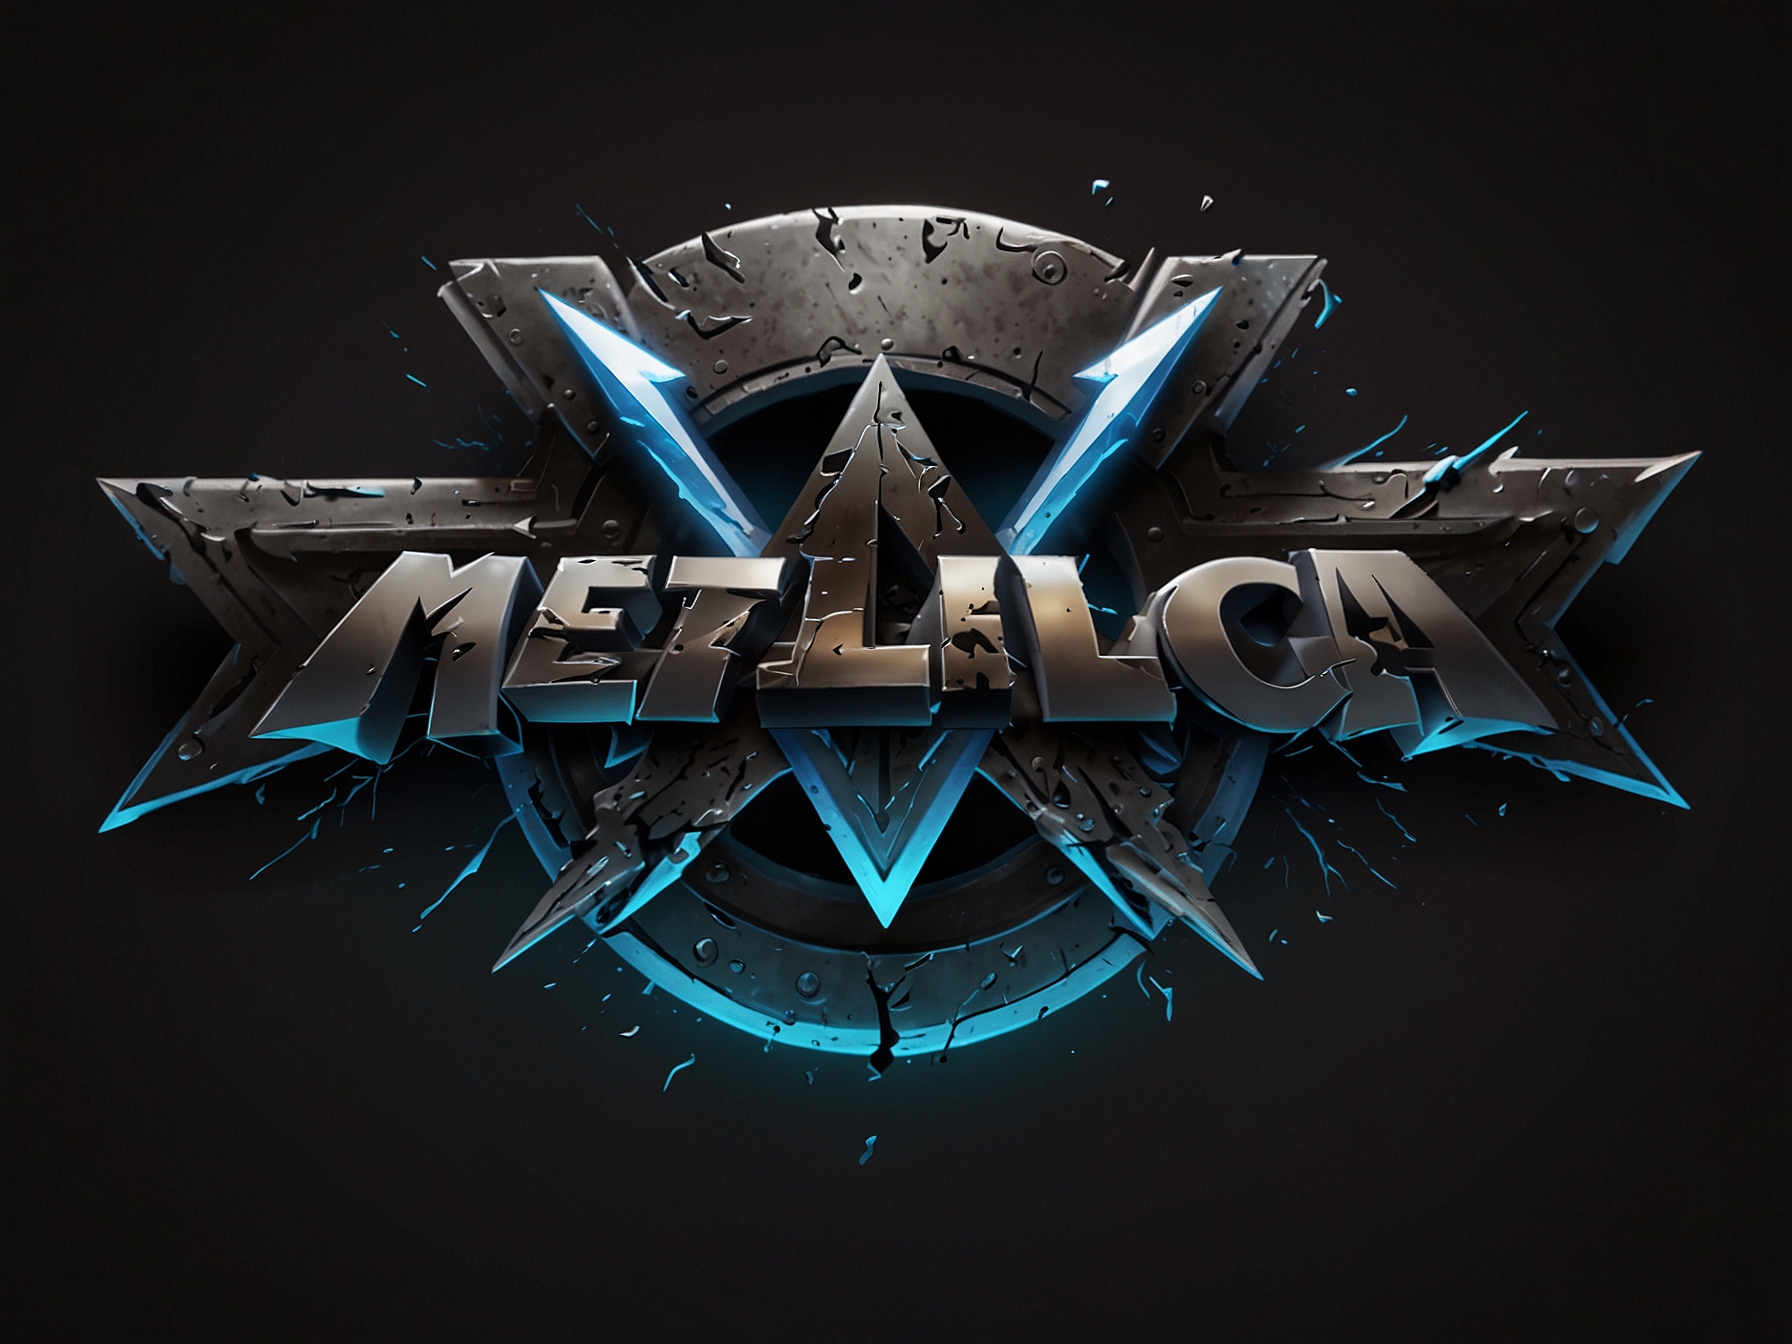 A teaser image showcasing Metallica's iconic logo and hints of new track additions, creating excitement among Fortnite players and Metallica fans for the upcoming Jam Tracks.